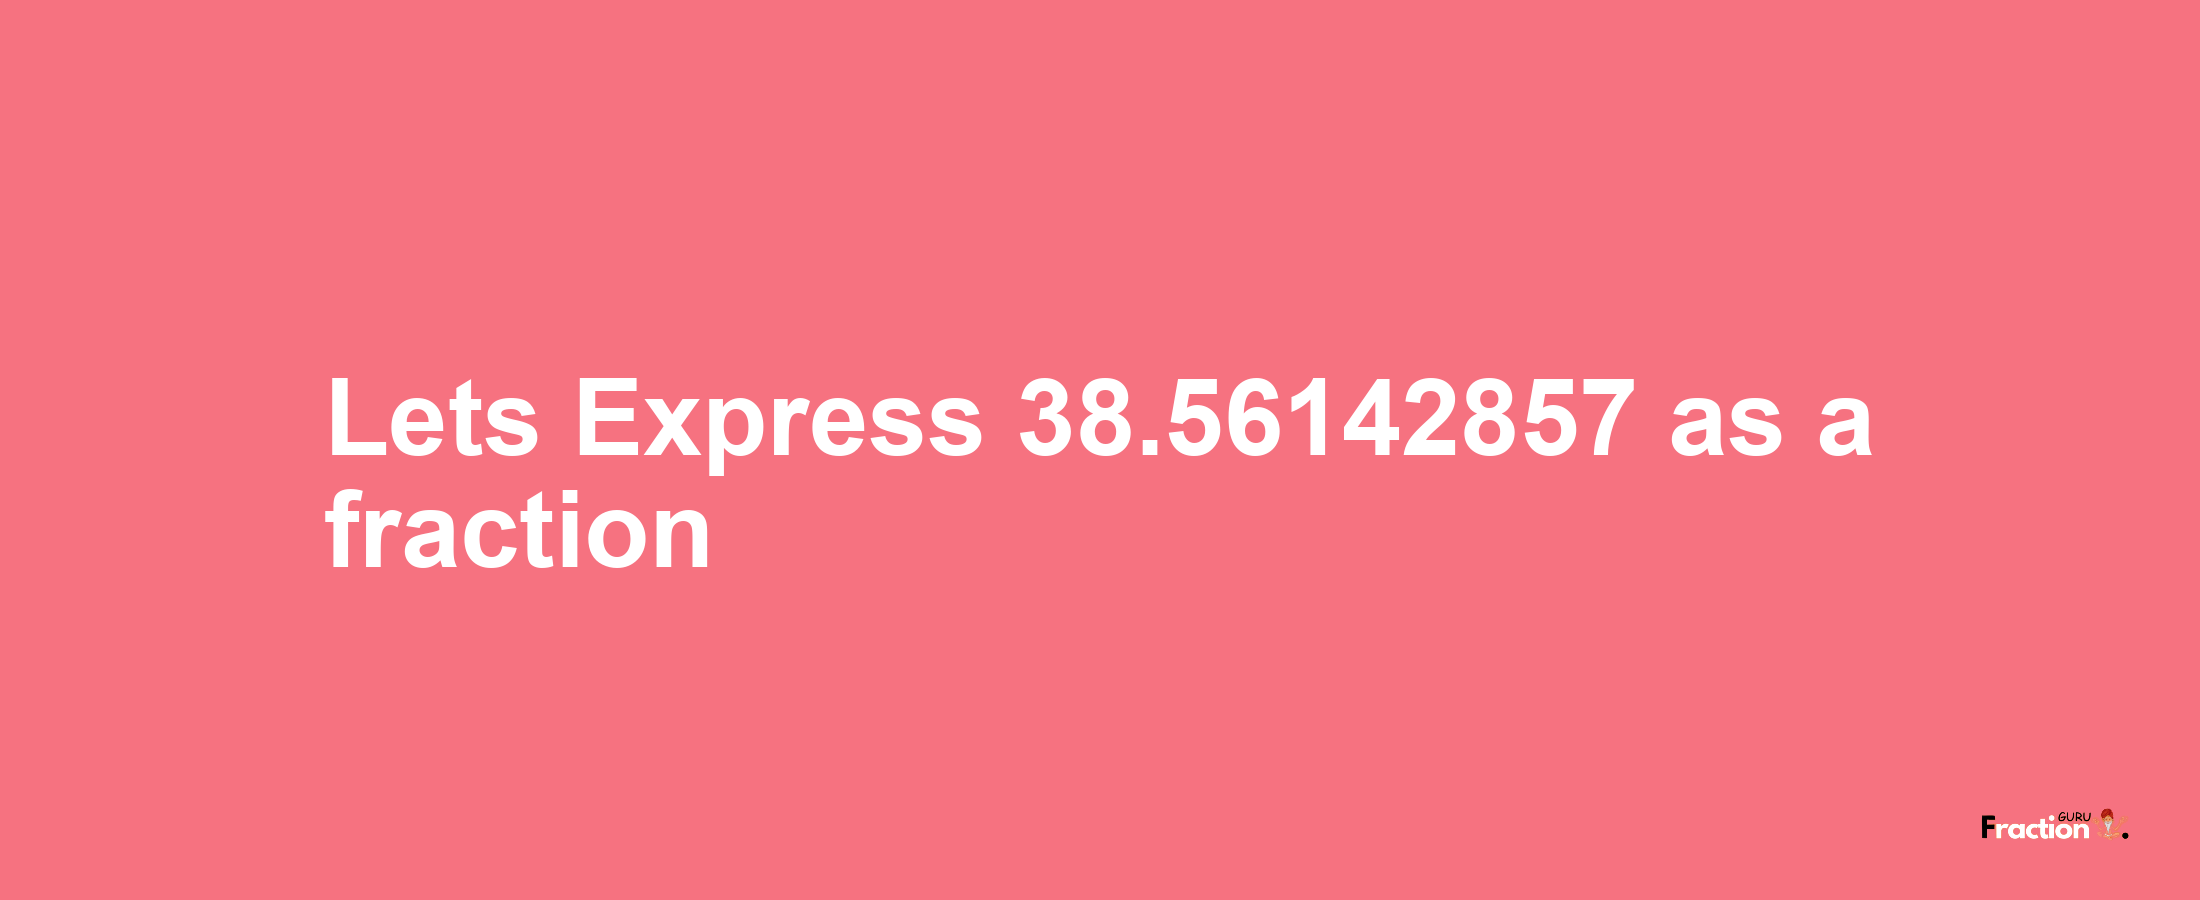 Lets Express 38.56142857 as afraction